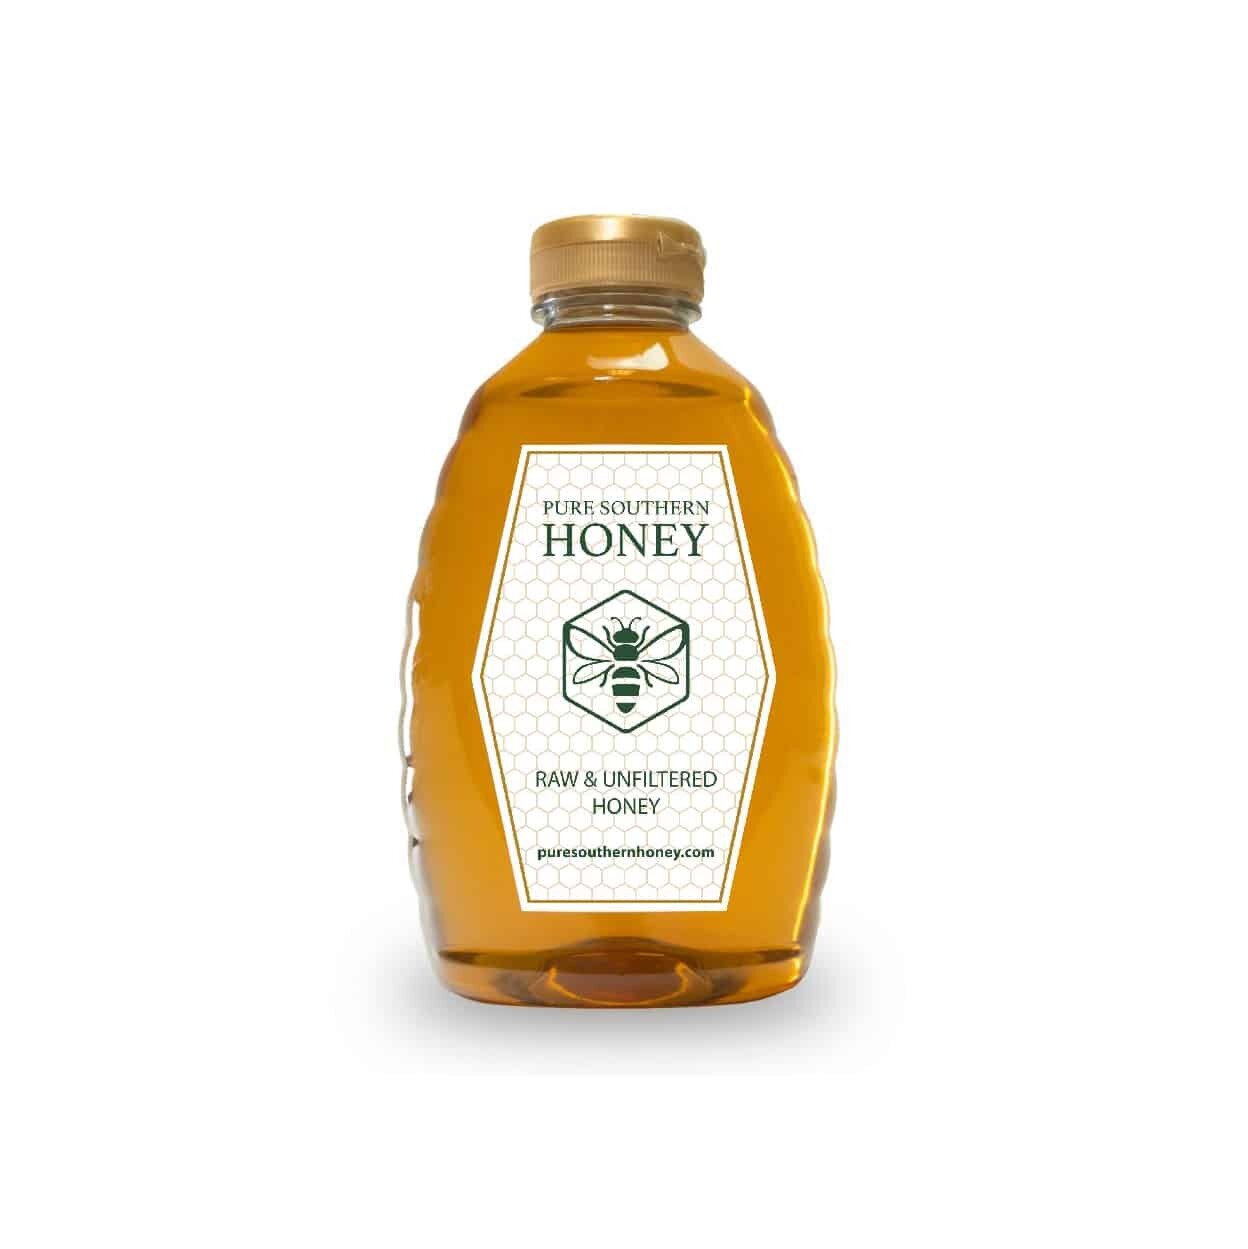 Raw & Unfiltered Honey - 2lbs